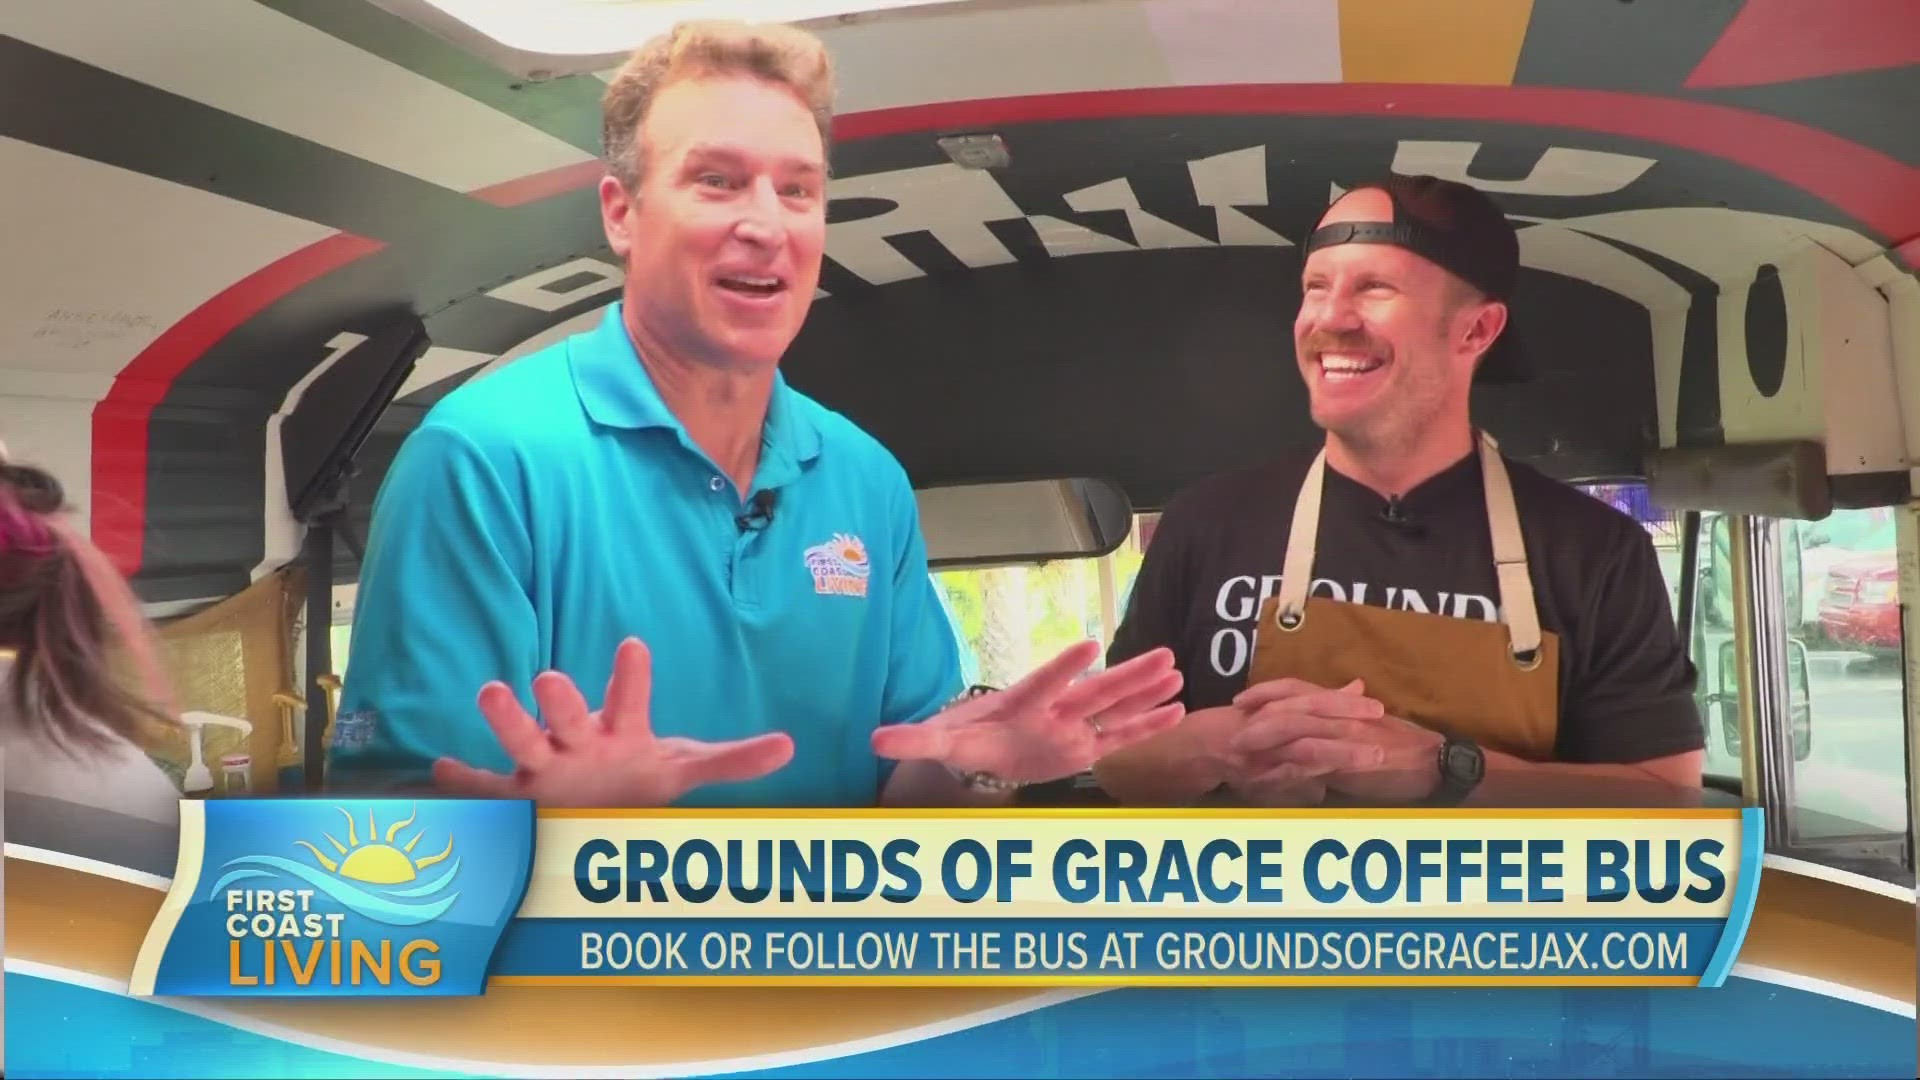 Life in a cup of coffee can literally save one life at a time! Ron Armstrong, the Executive Director of Grounds of Grace, joins Mike in the famous Coffee Bus.